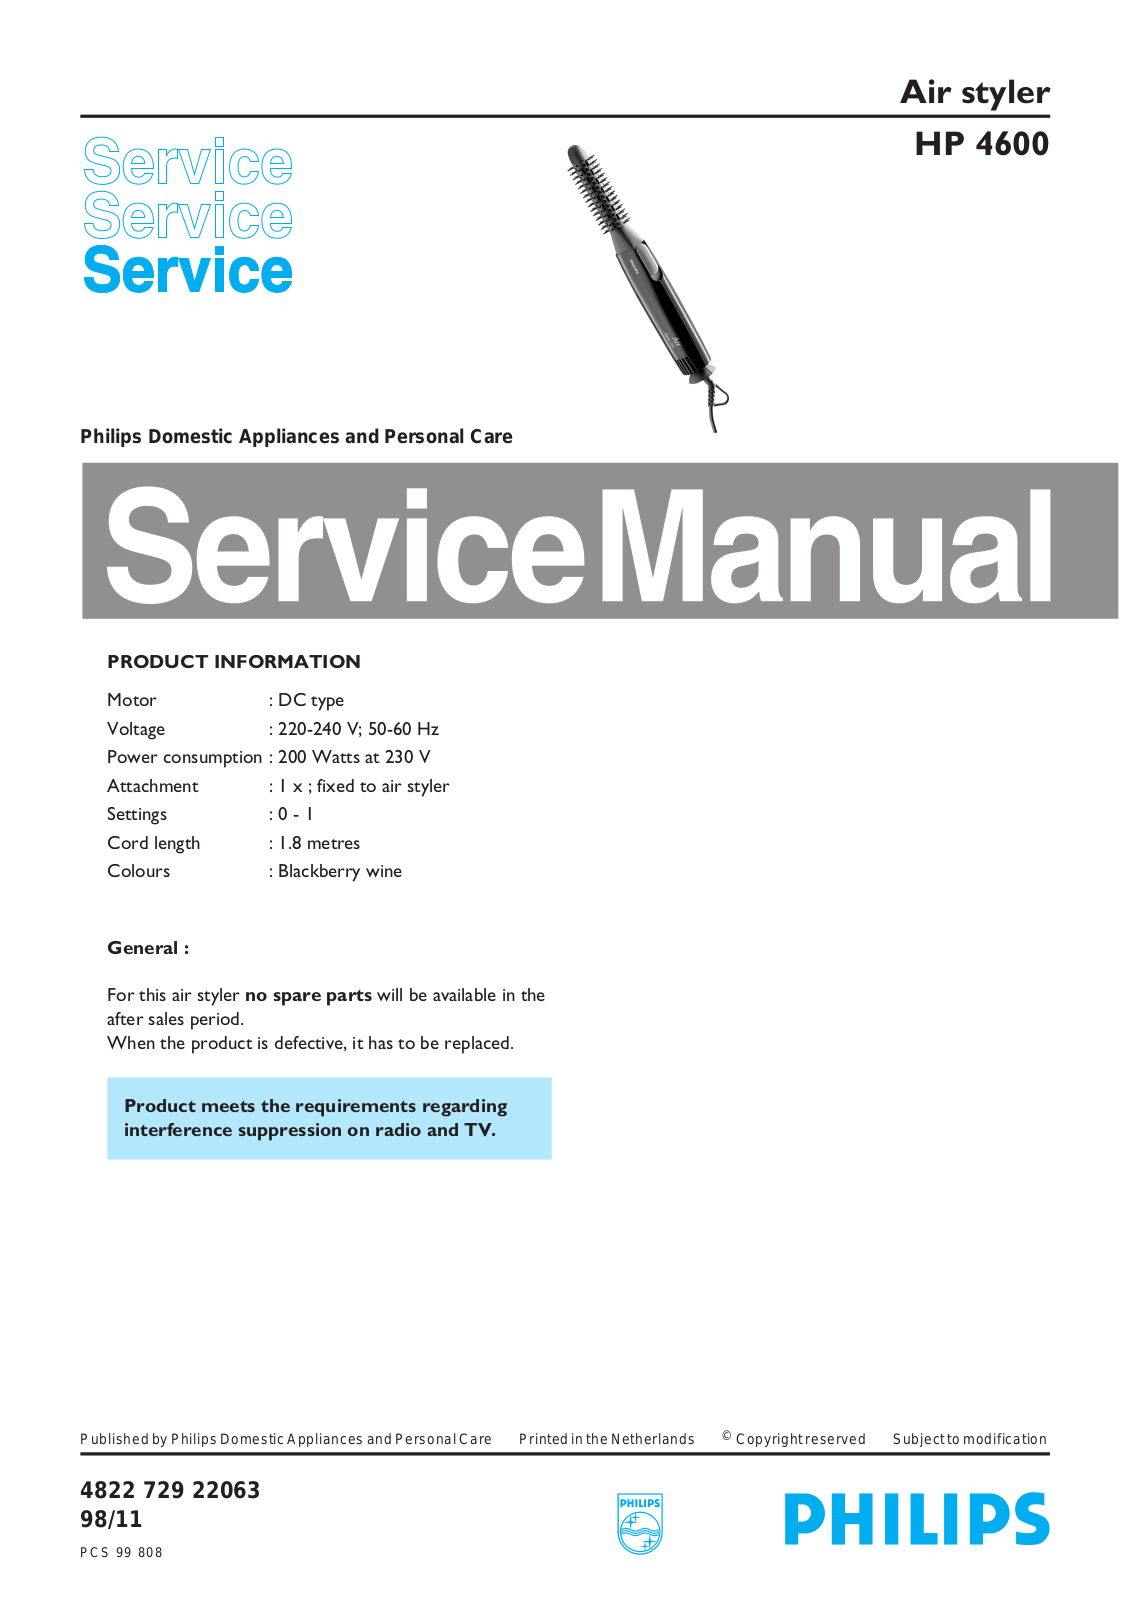 Philips HP 4600 Service Manual